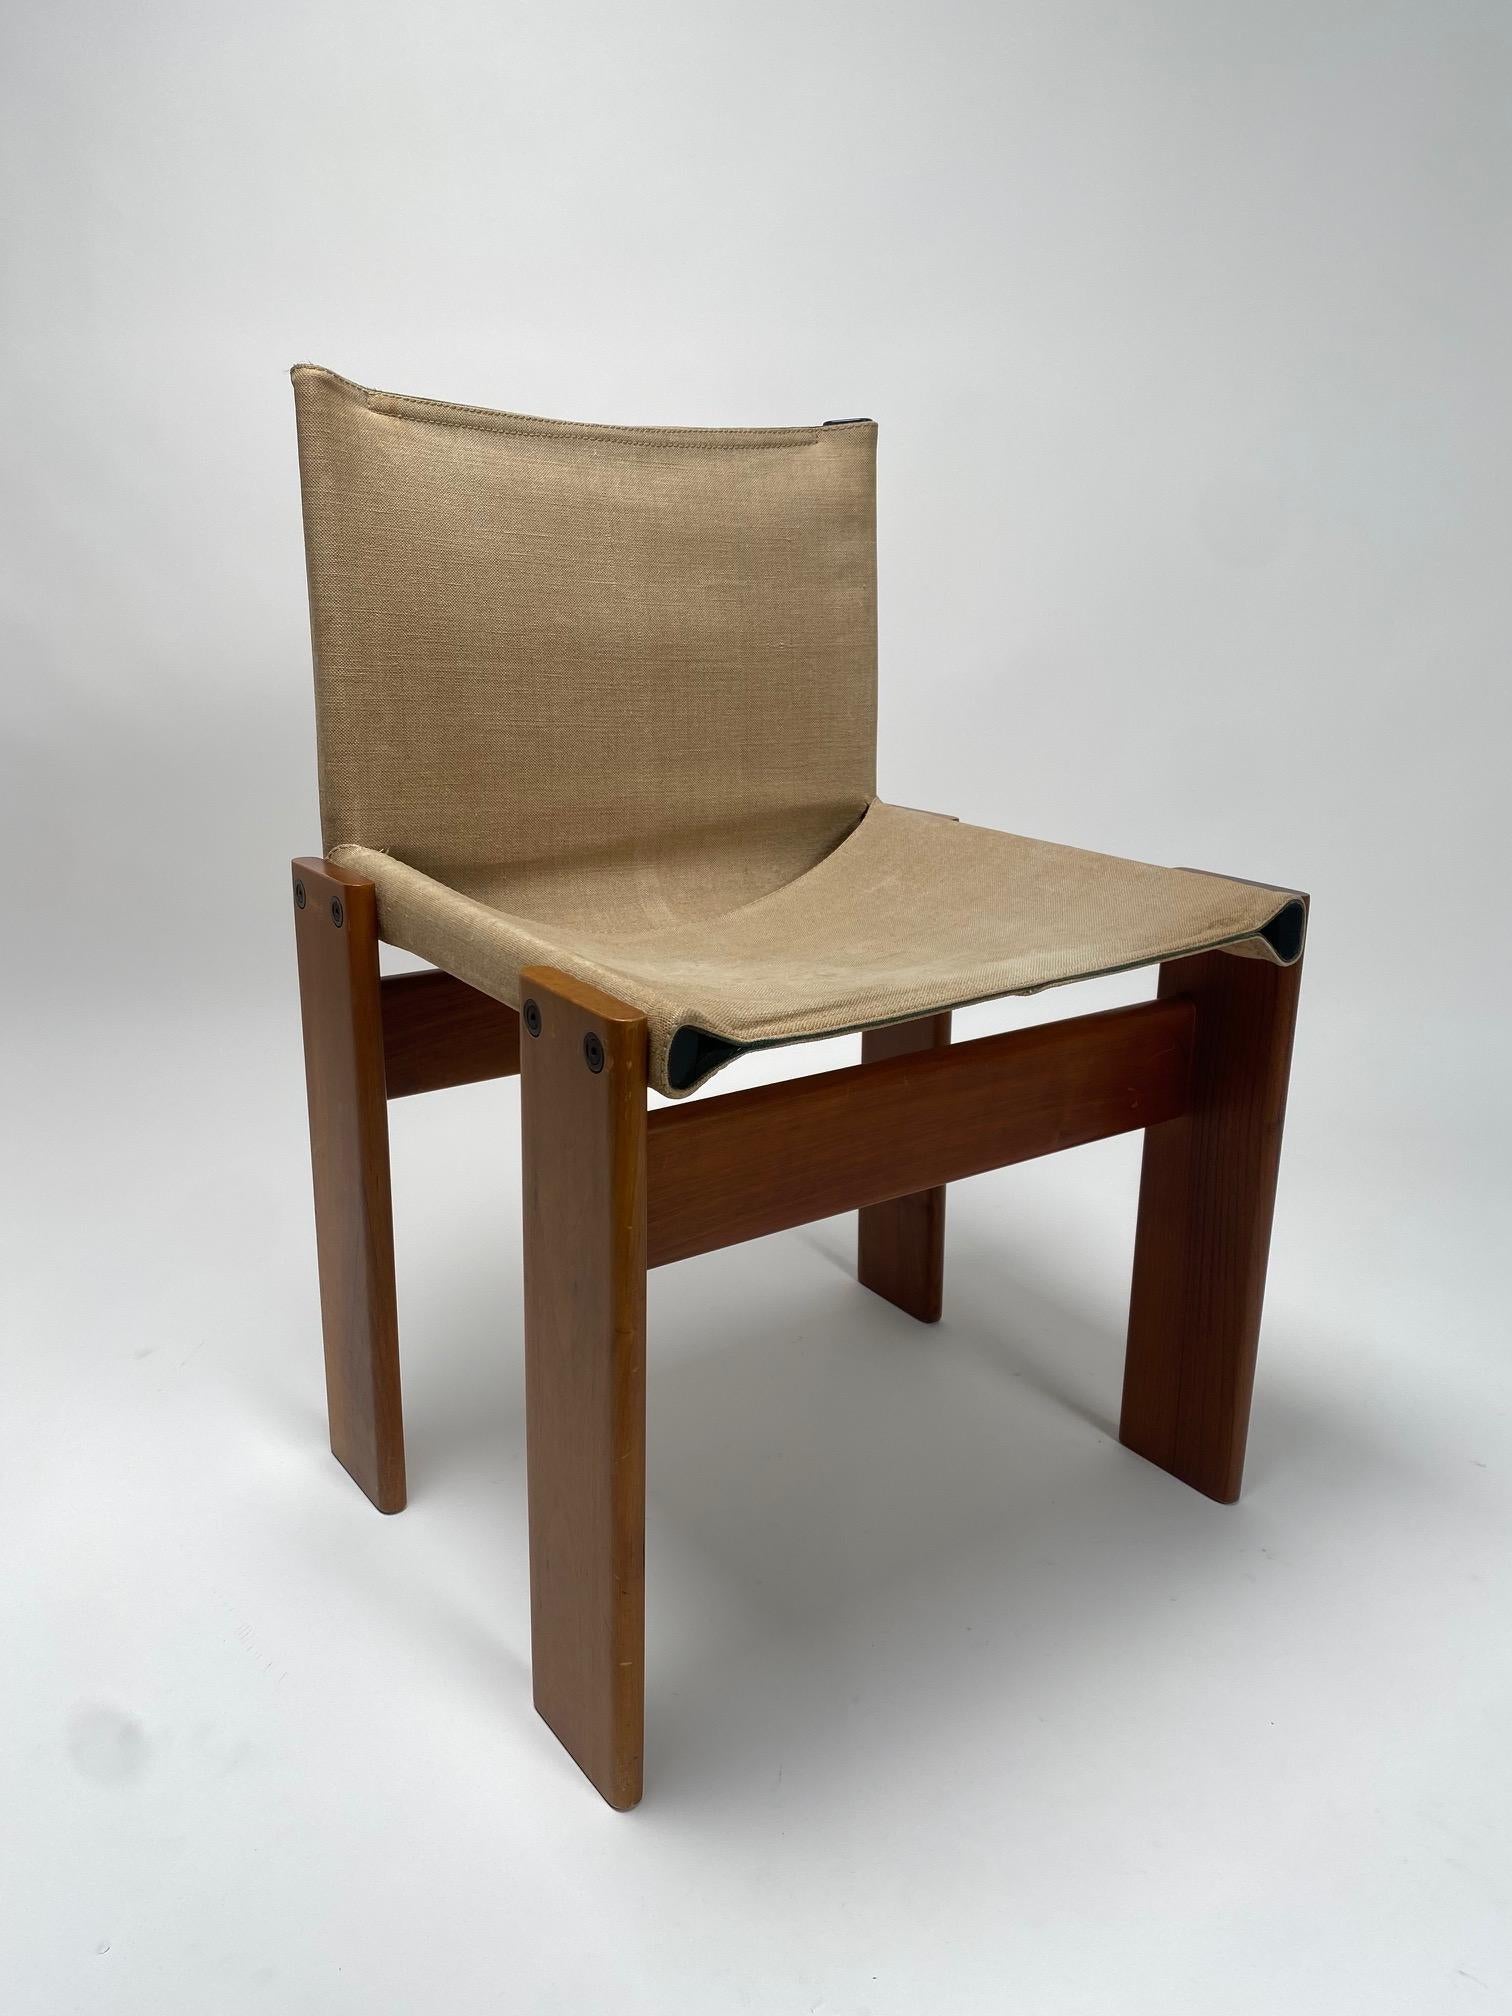 Set of 6 canvas and wood chairs model Monk, Afra & Tobia Scarpa for Molteni, Italy

It is one of the most iconic and refined models by the famous Italian architect and designer couple Afra & Tobia Scarpa. Comfortable, elegant chairs, capable of